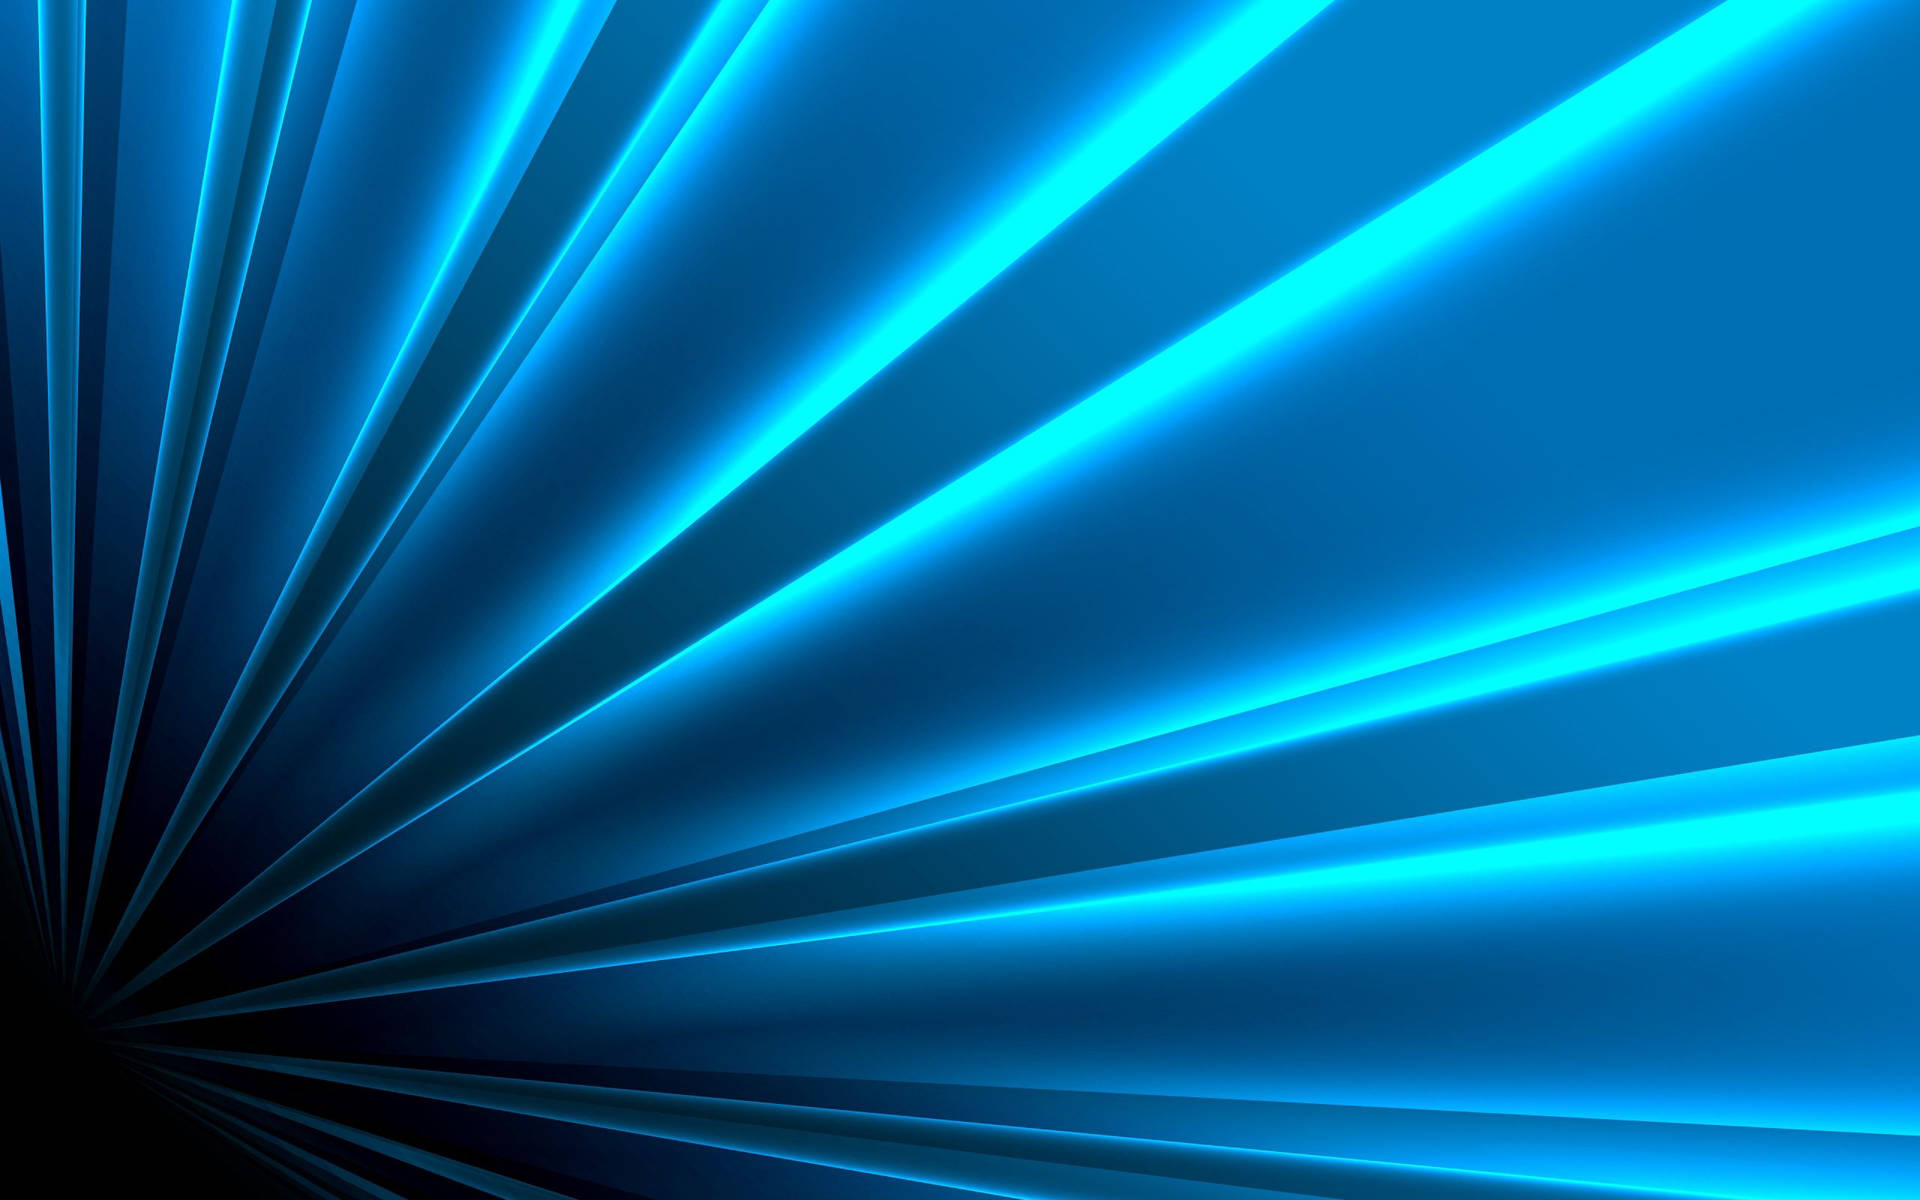 Glowing Blue Lines Blur Into Abstract Art Background